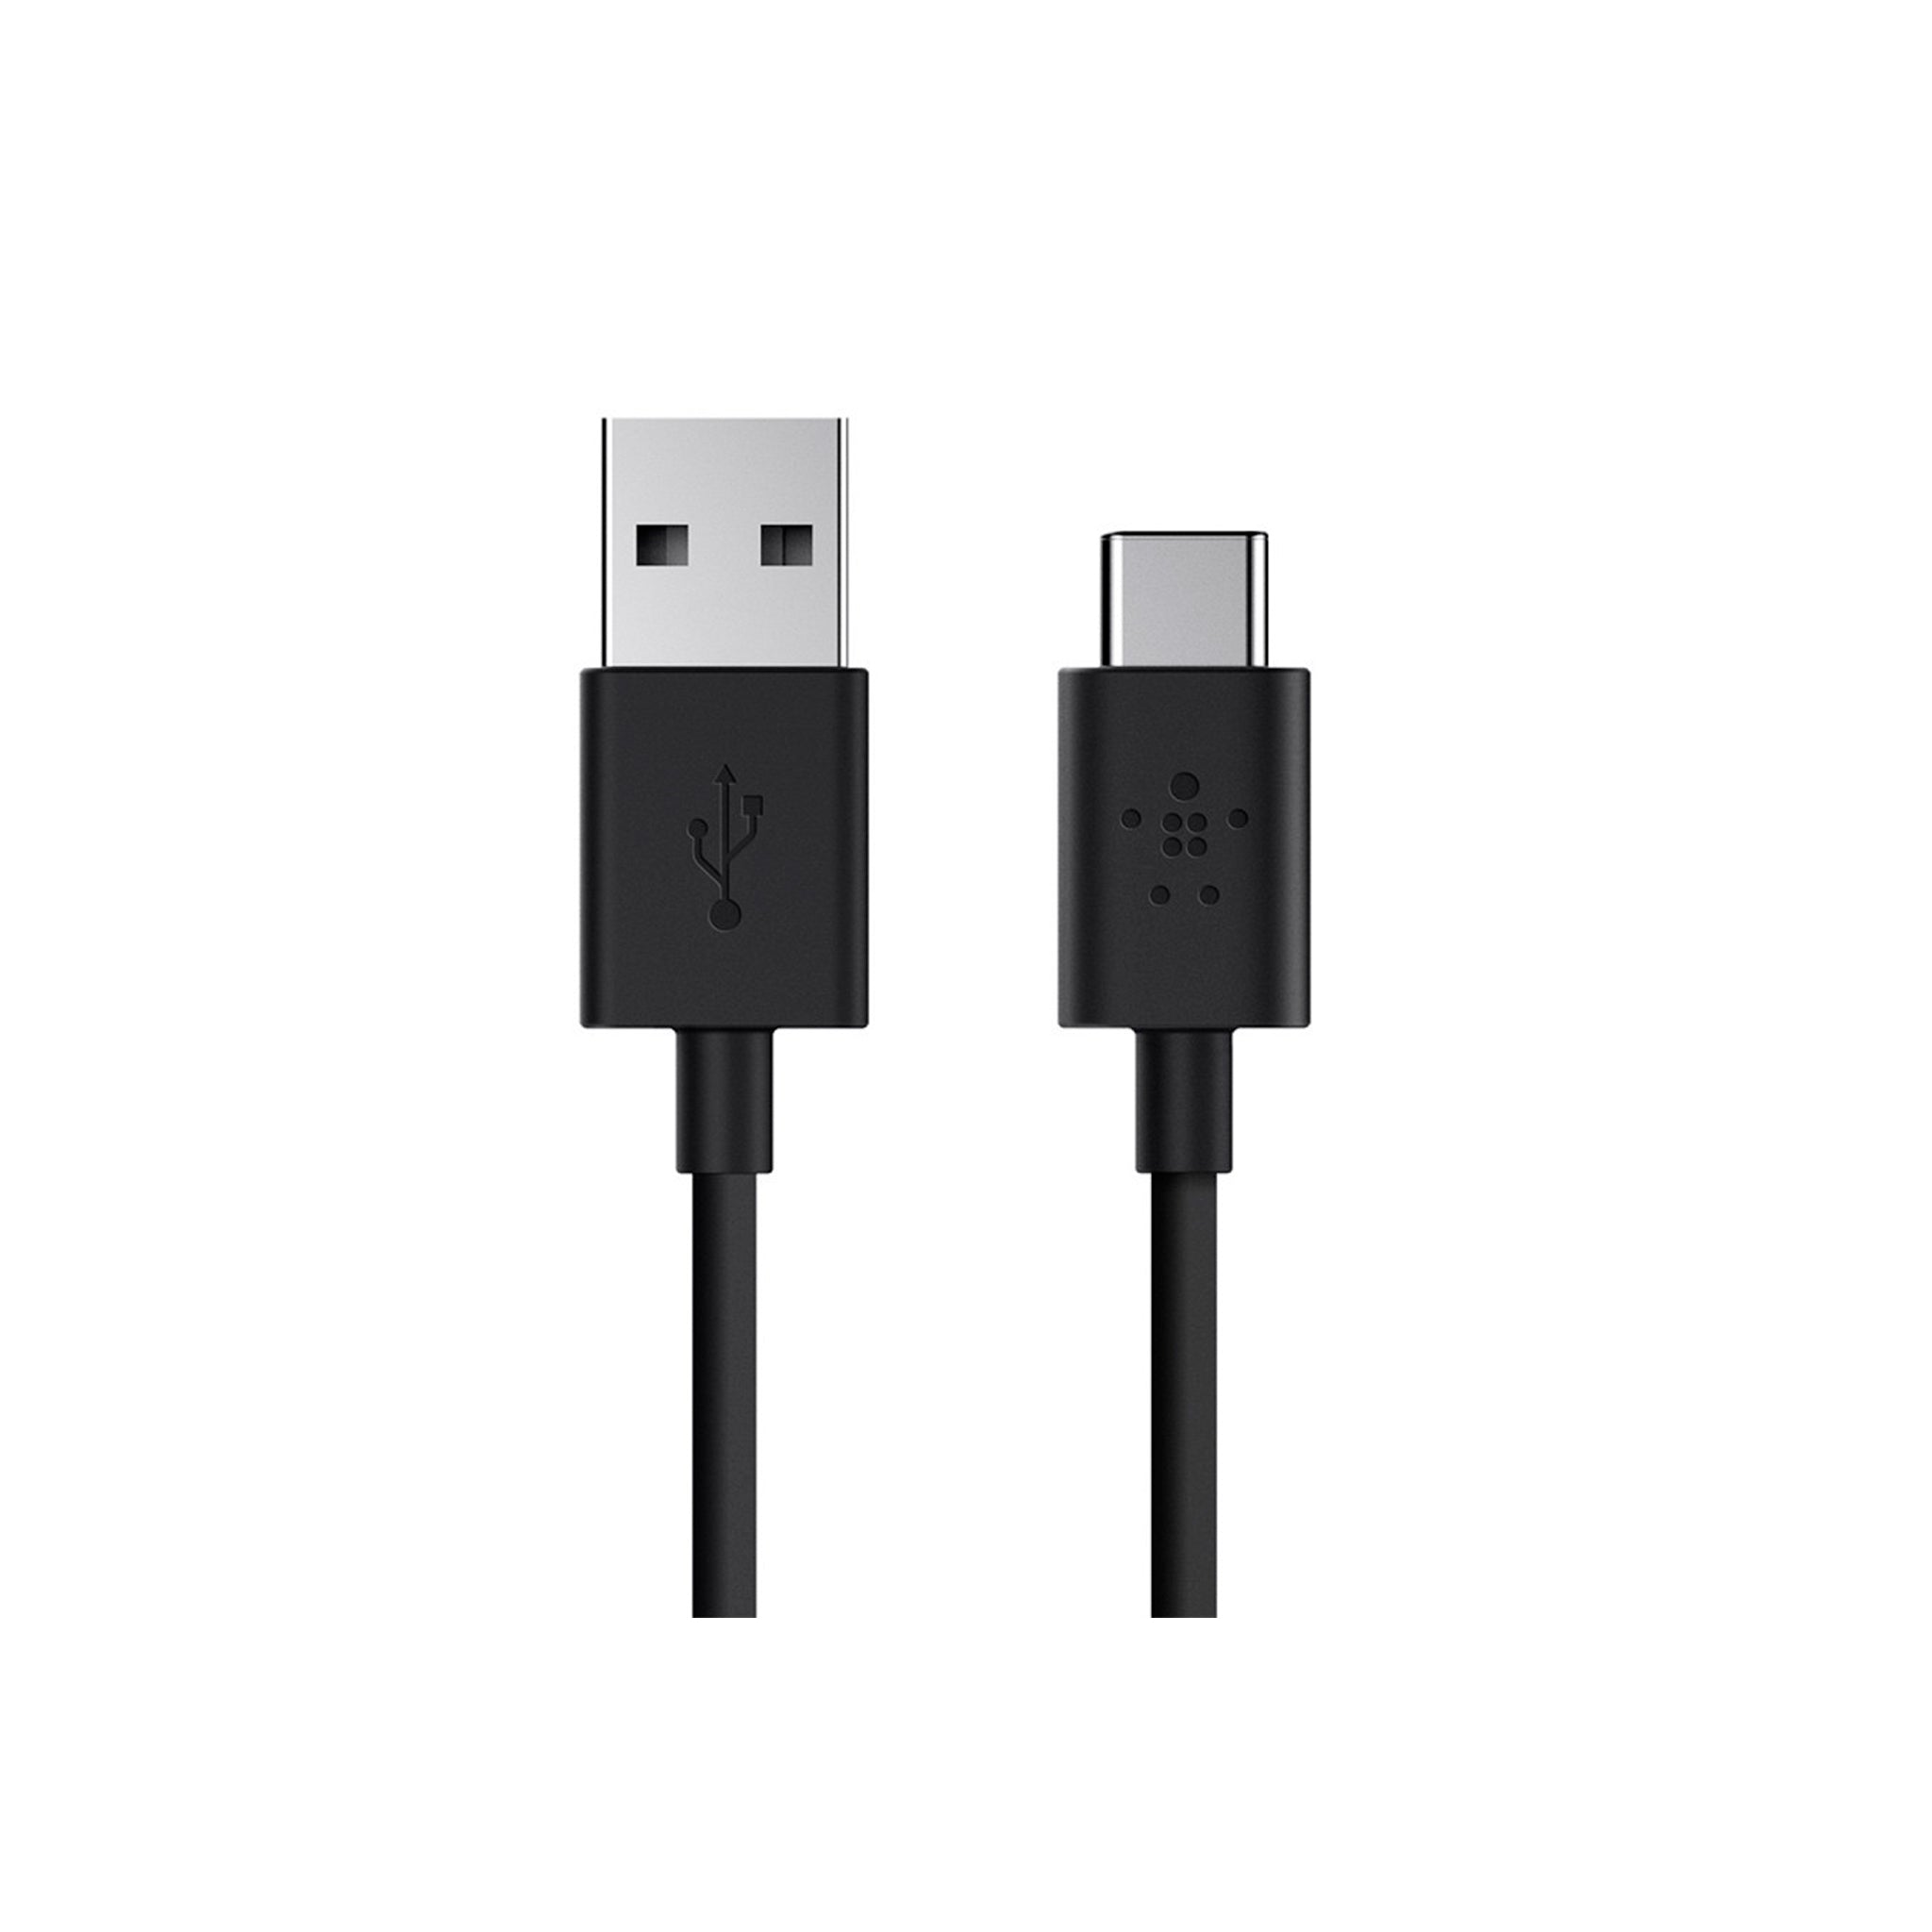 Belkin - Usb A To Usb C 2.0 Cable 6ft - Black